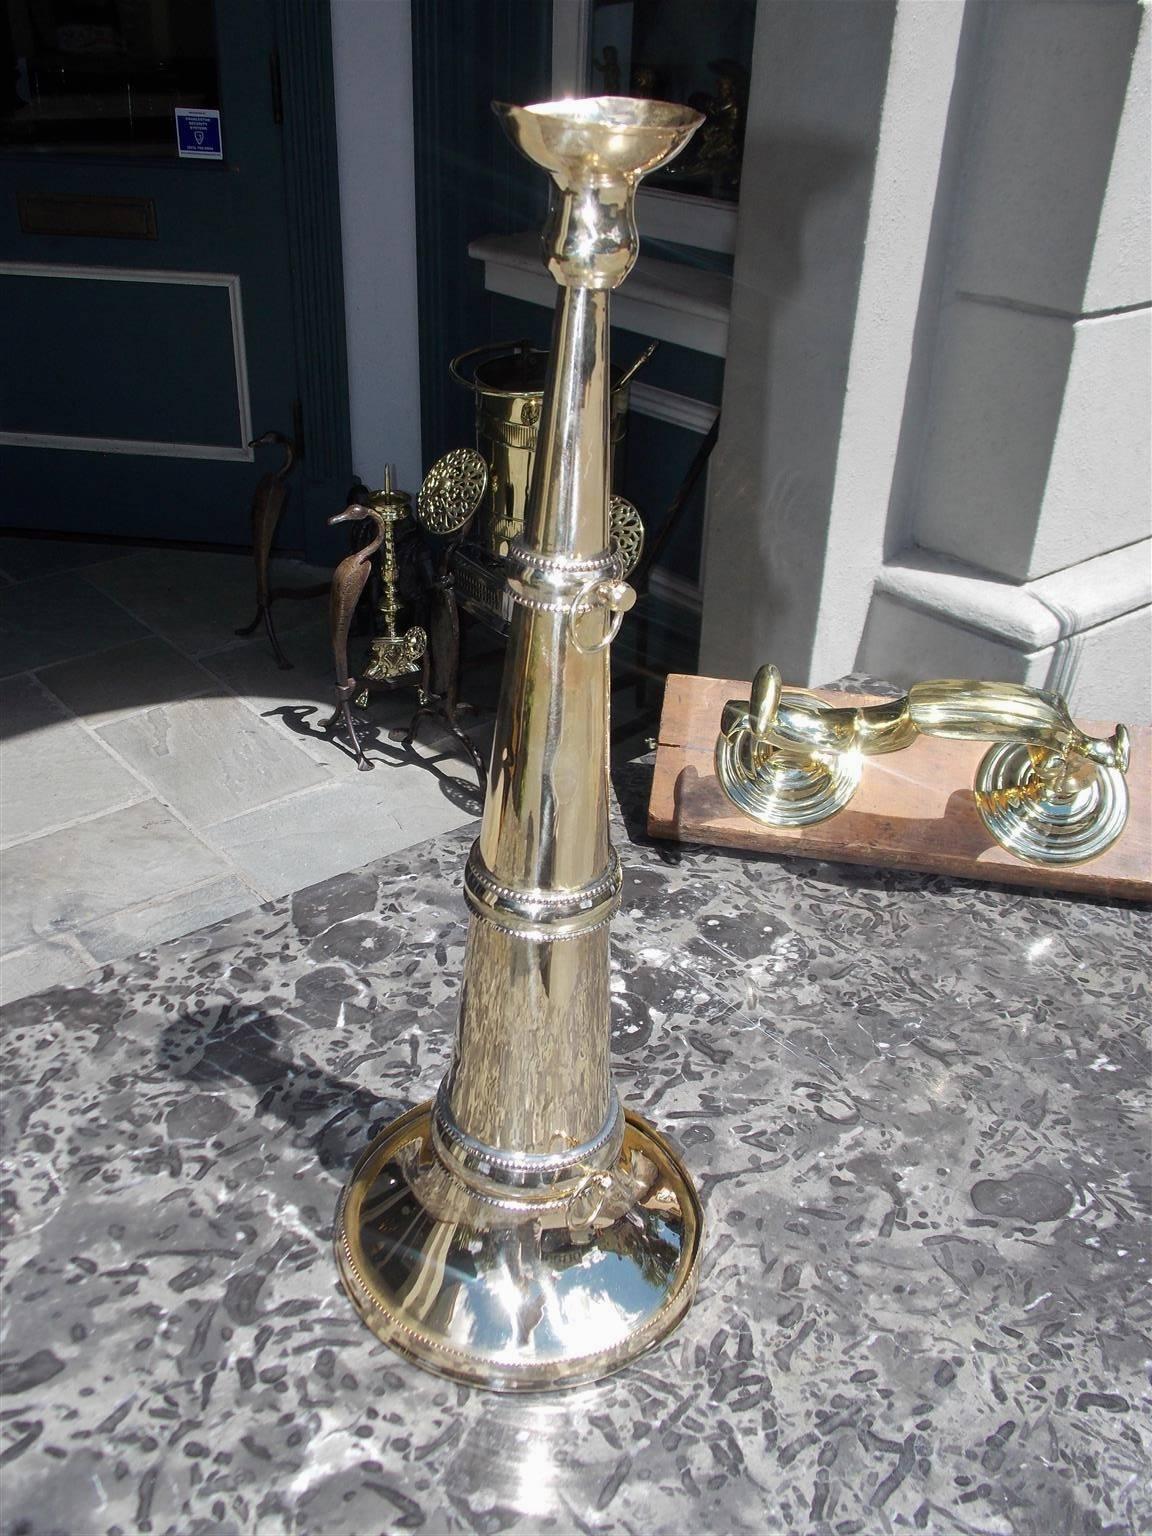 American hand held cast brass Yachtsman's spearing trumpet with bell shaped mouthpiece, coned-shaped column with fine detailed beaded bandings , attached rings for straps, and terminating on a molded edge opening, Mid-19th century. Trumpet was used